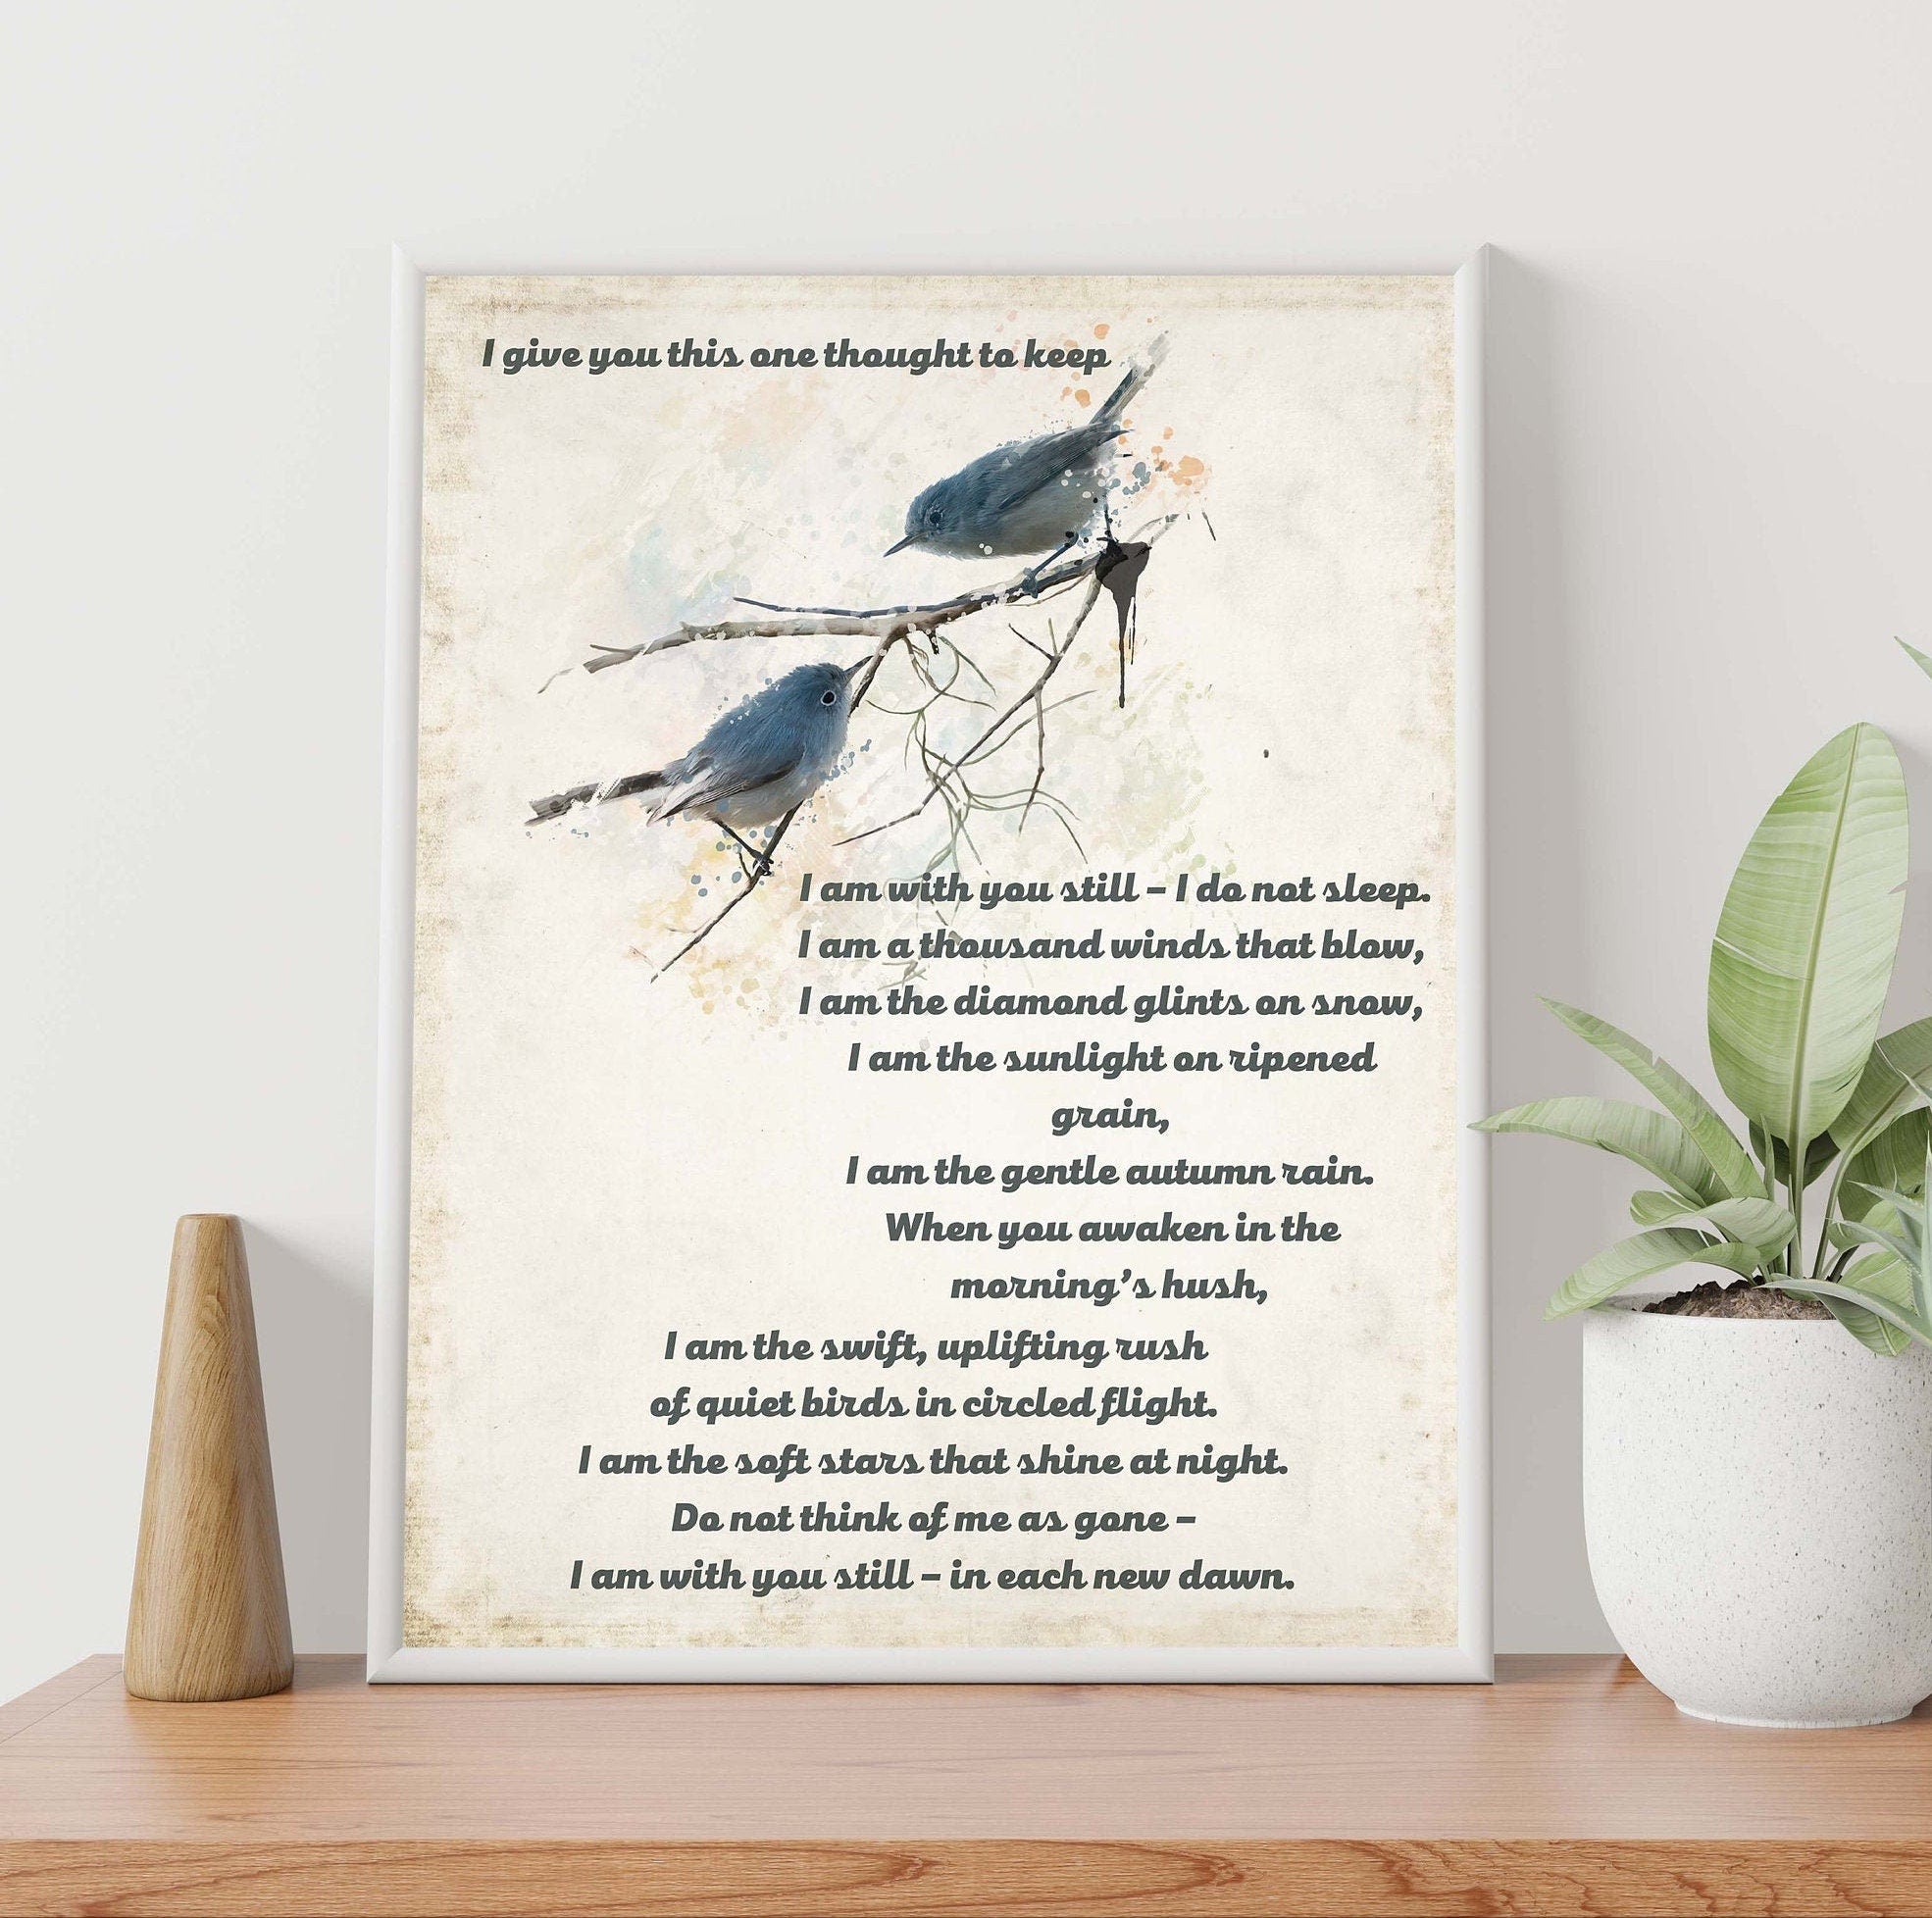 Native American Prayer, I Give You This One Thought To Keep Quote Print With Watercolor Birds